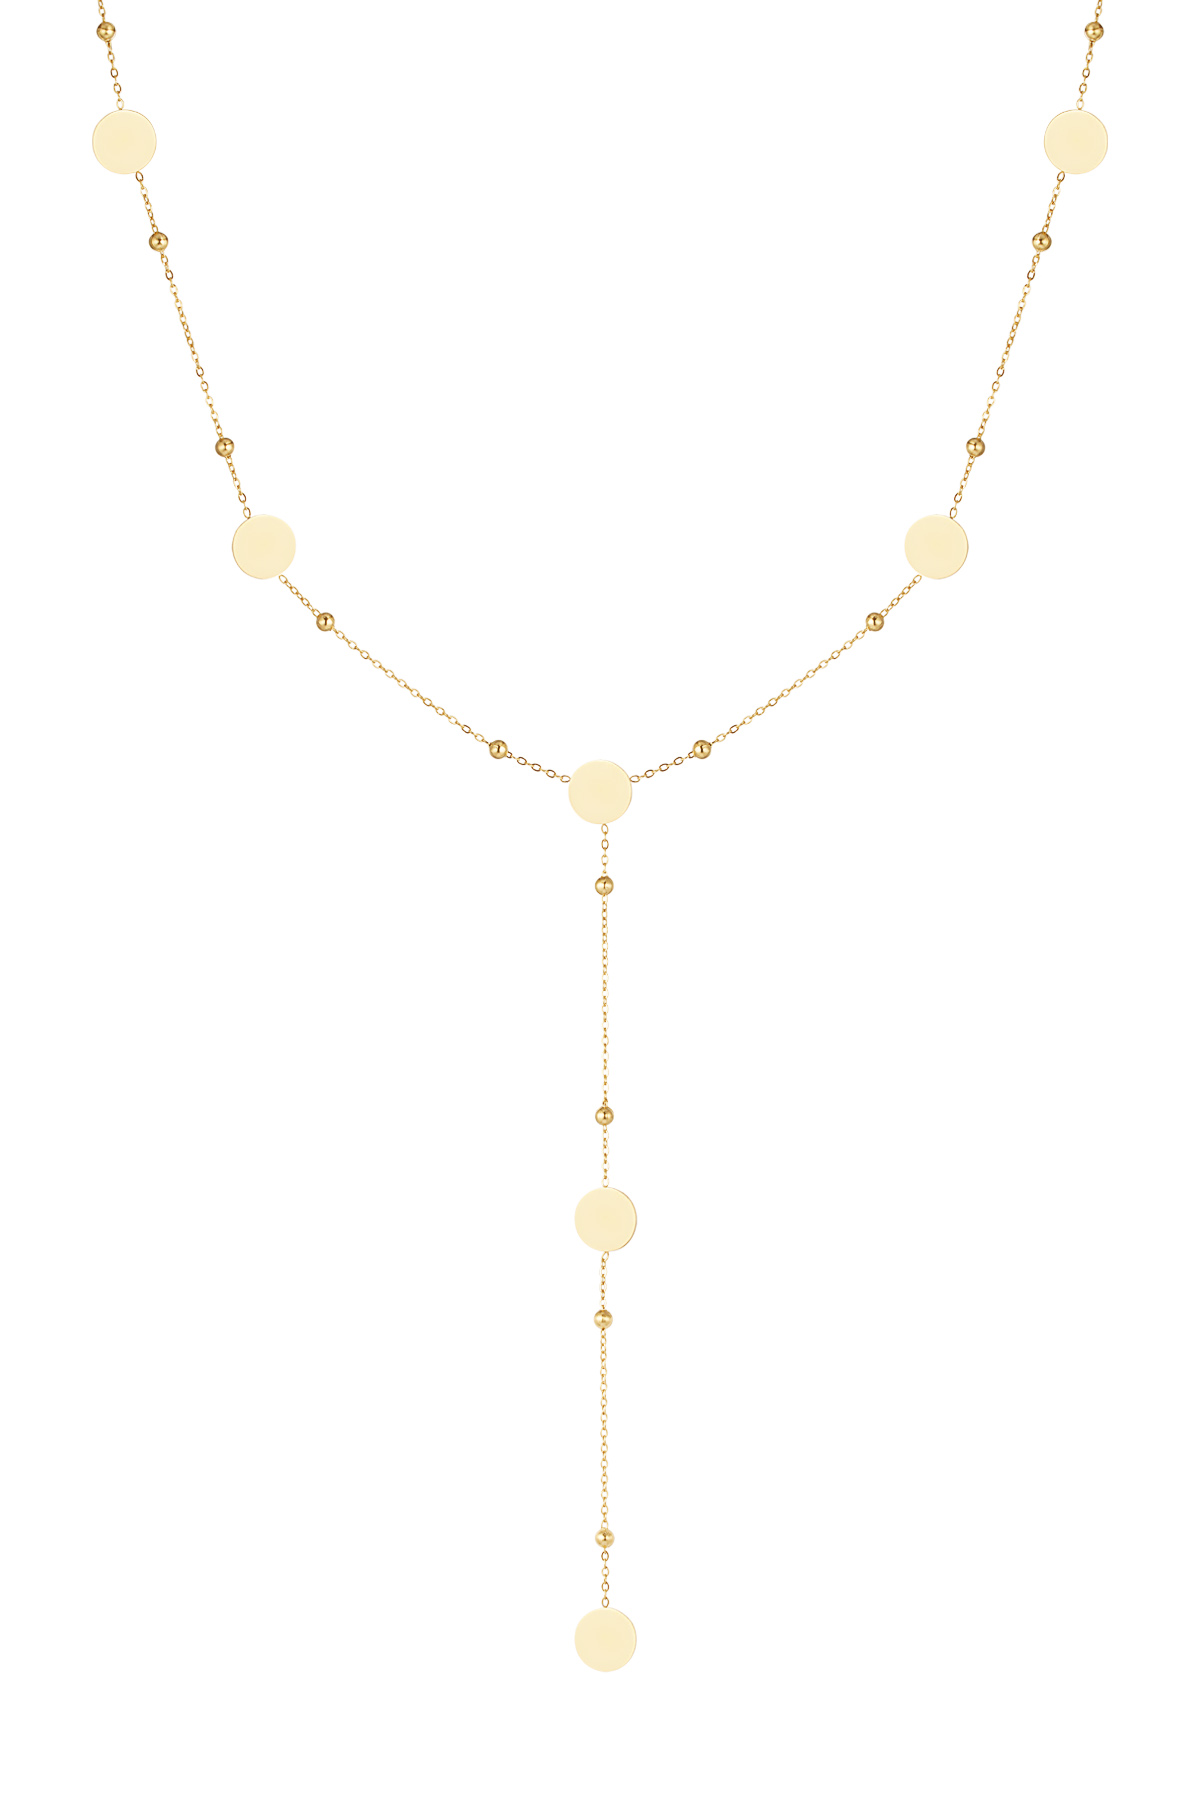 Long necklace circles all over - gold